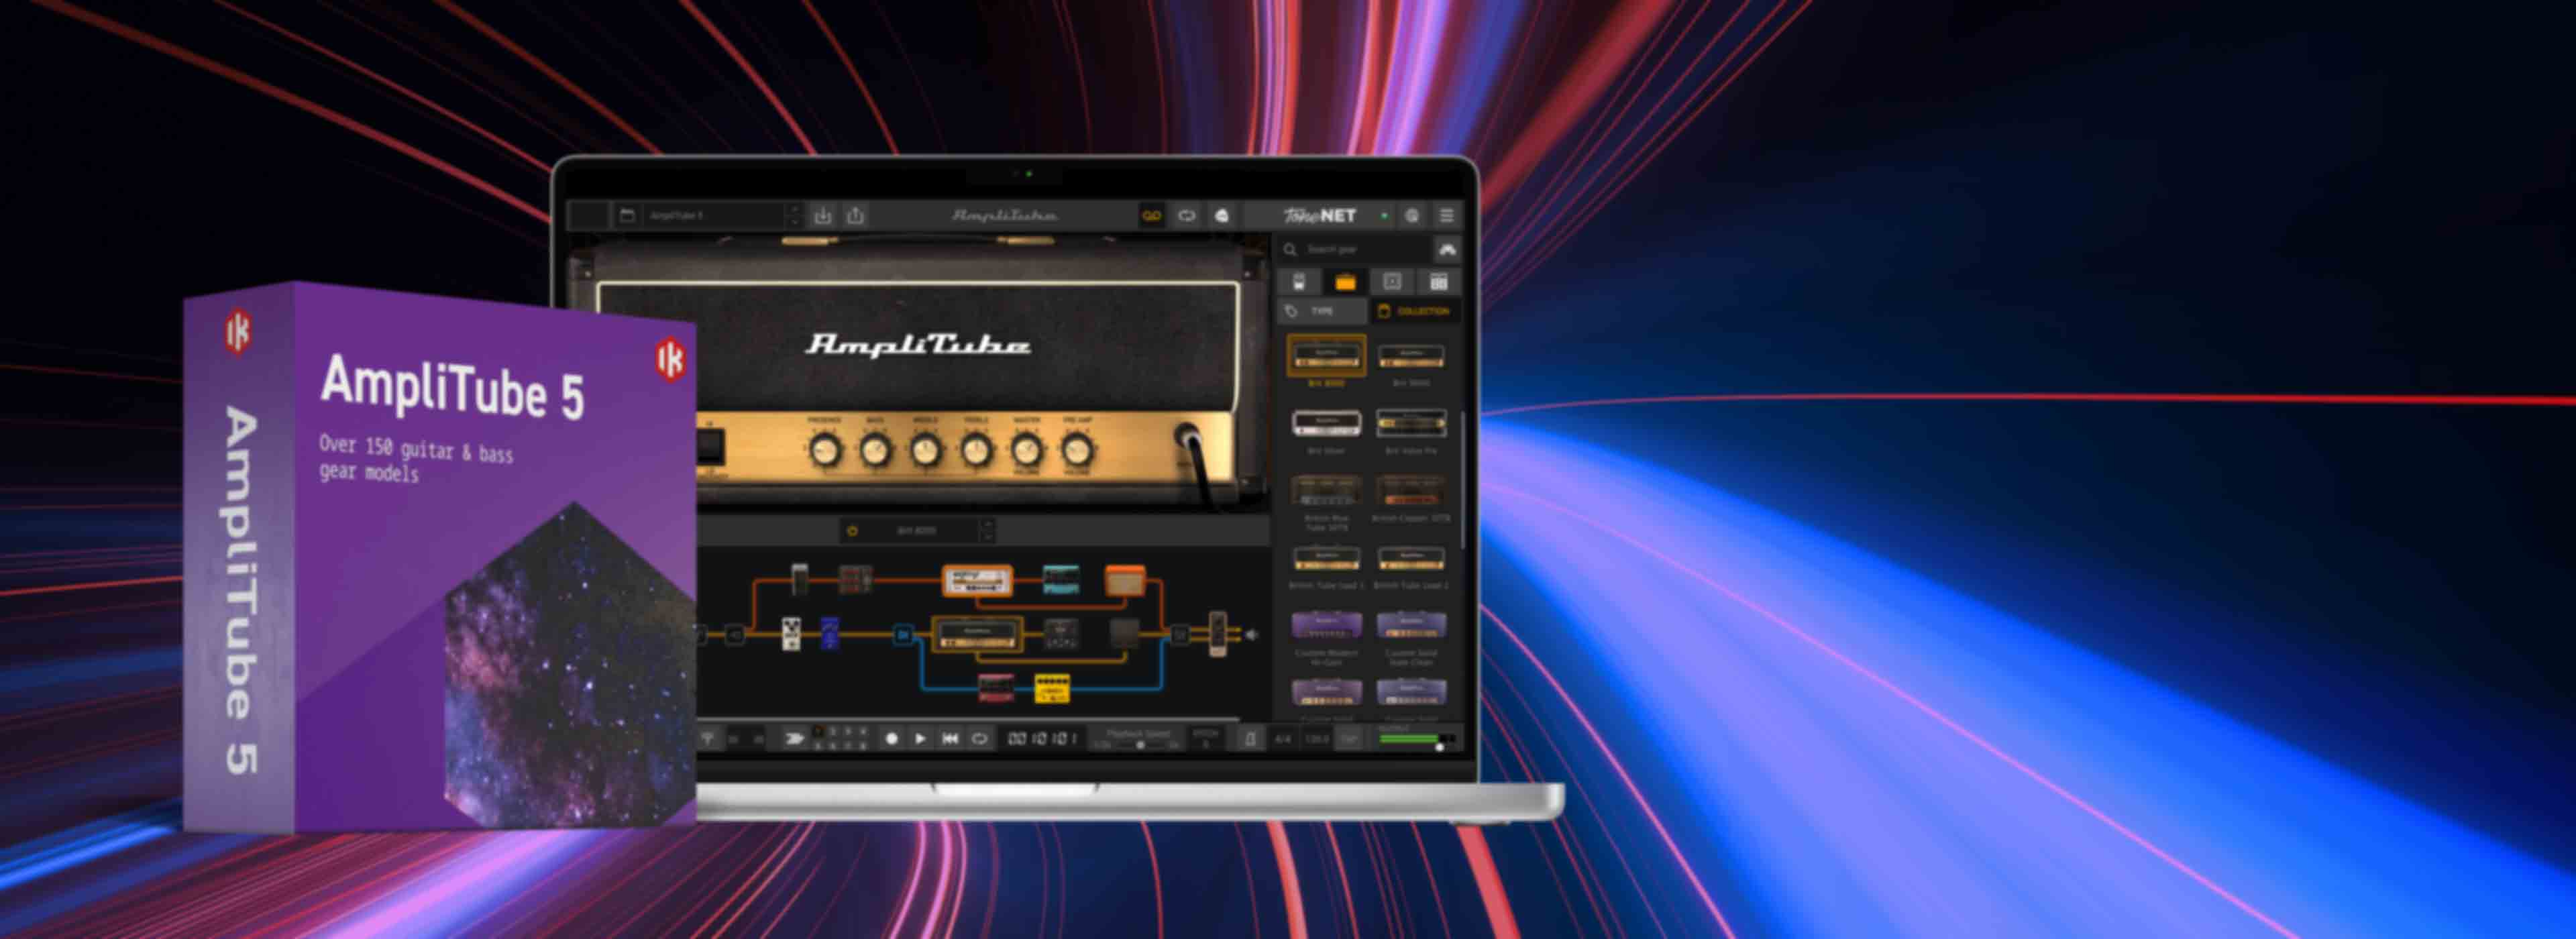 Up to 75% off top amp modeling software